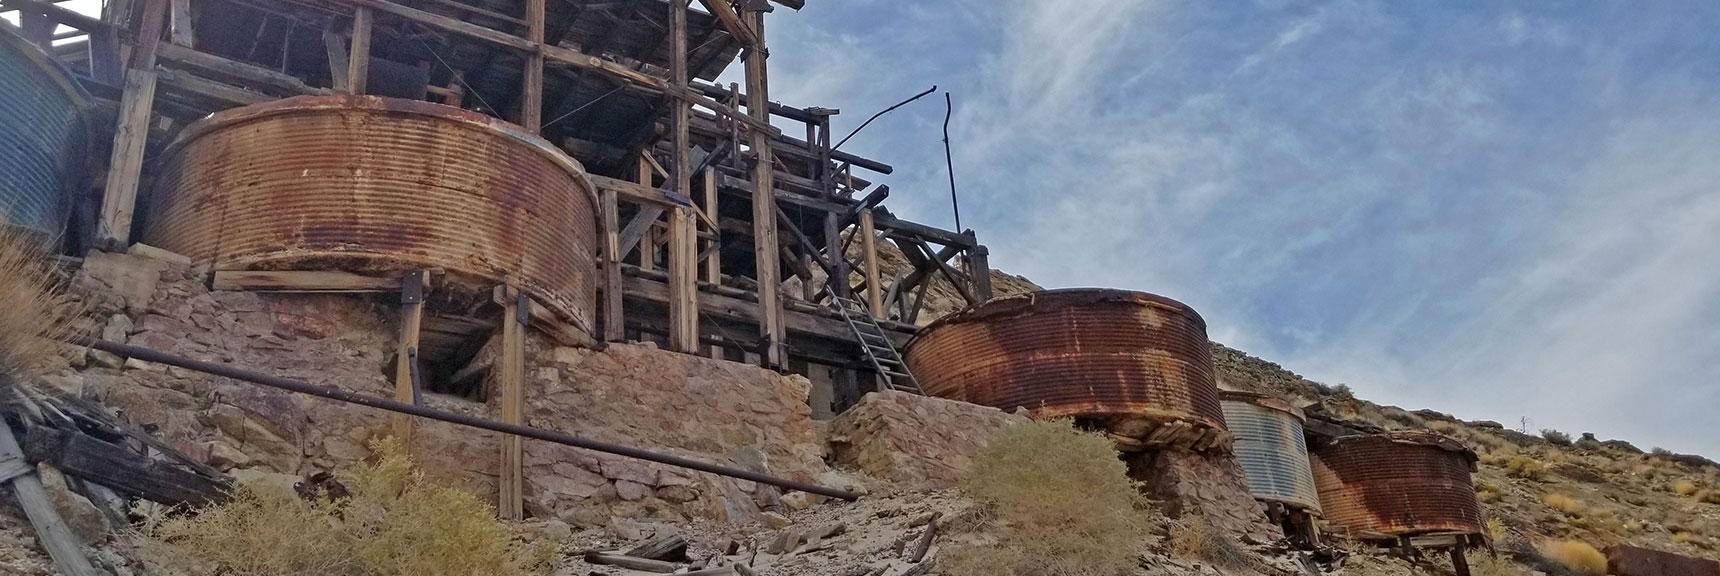 4 Mercury Amalgamation Tables and Nine Cyanide Tanks Were Used in Gold Extraction Process | Skidoo Stamp Mill, Panamint Mountains, Death Valley National Park, CA